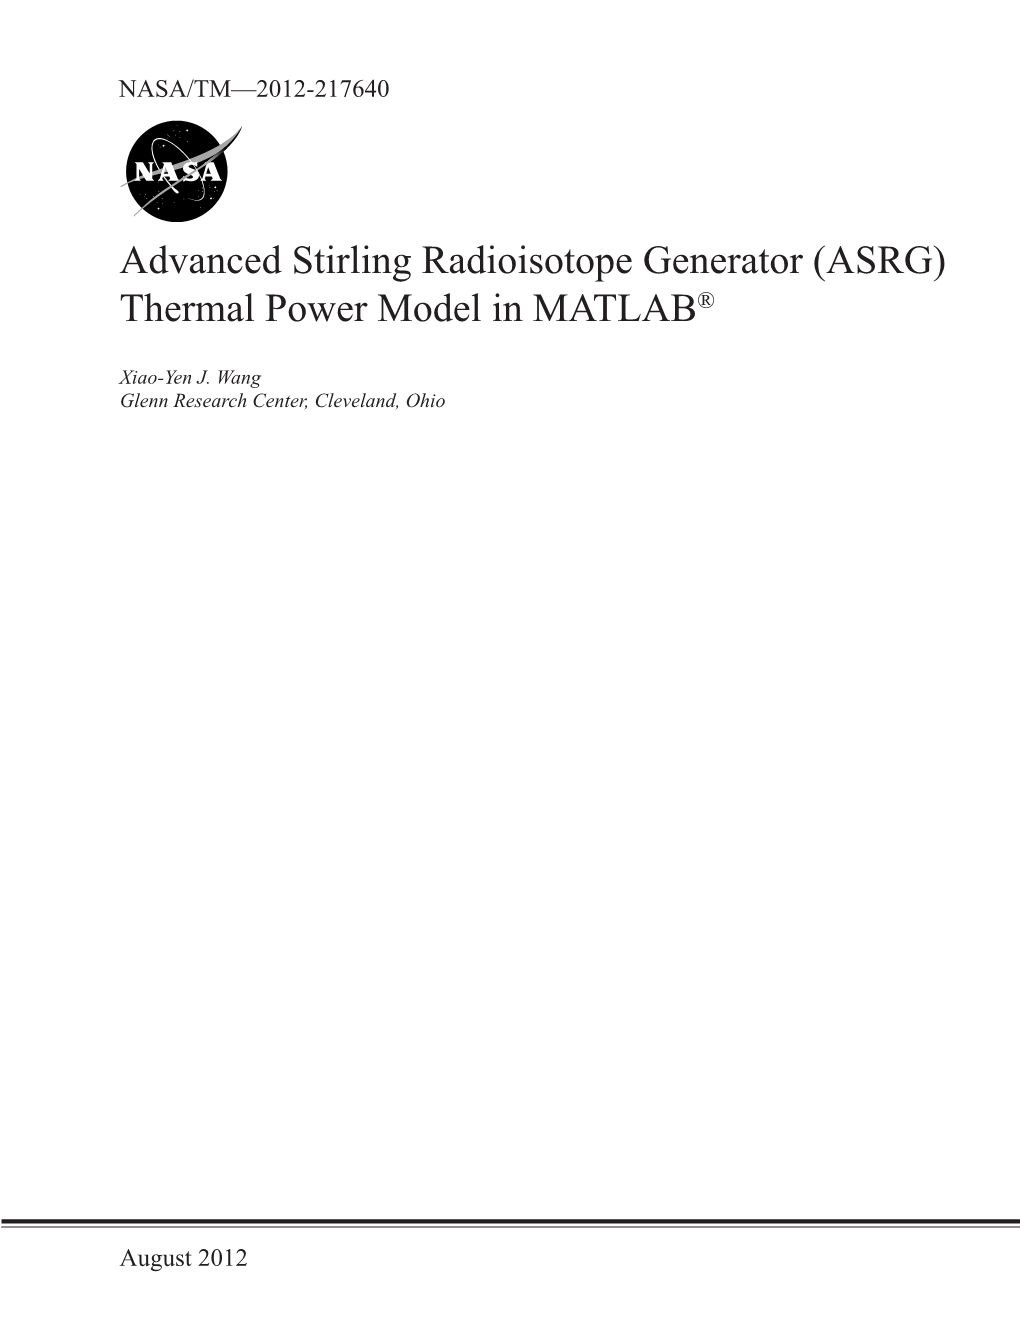 Advanced Stirling Radioisotope Generator (ASRG) Thermal Power Model in MATLAB®